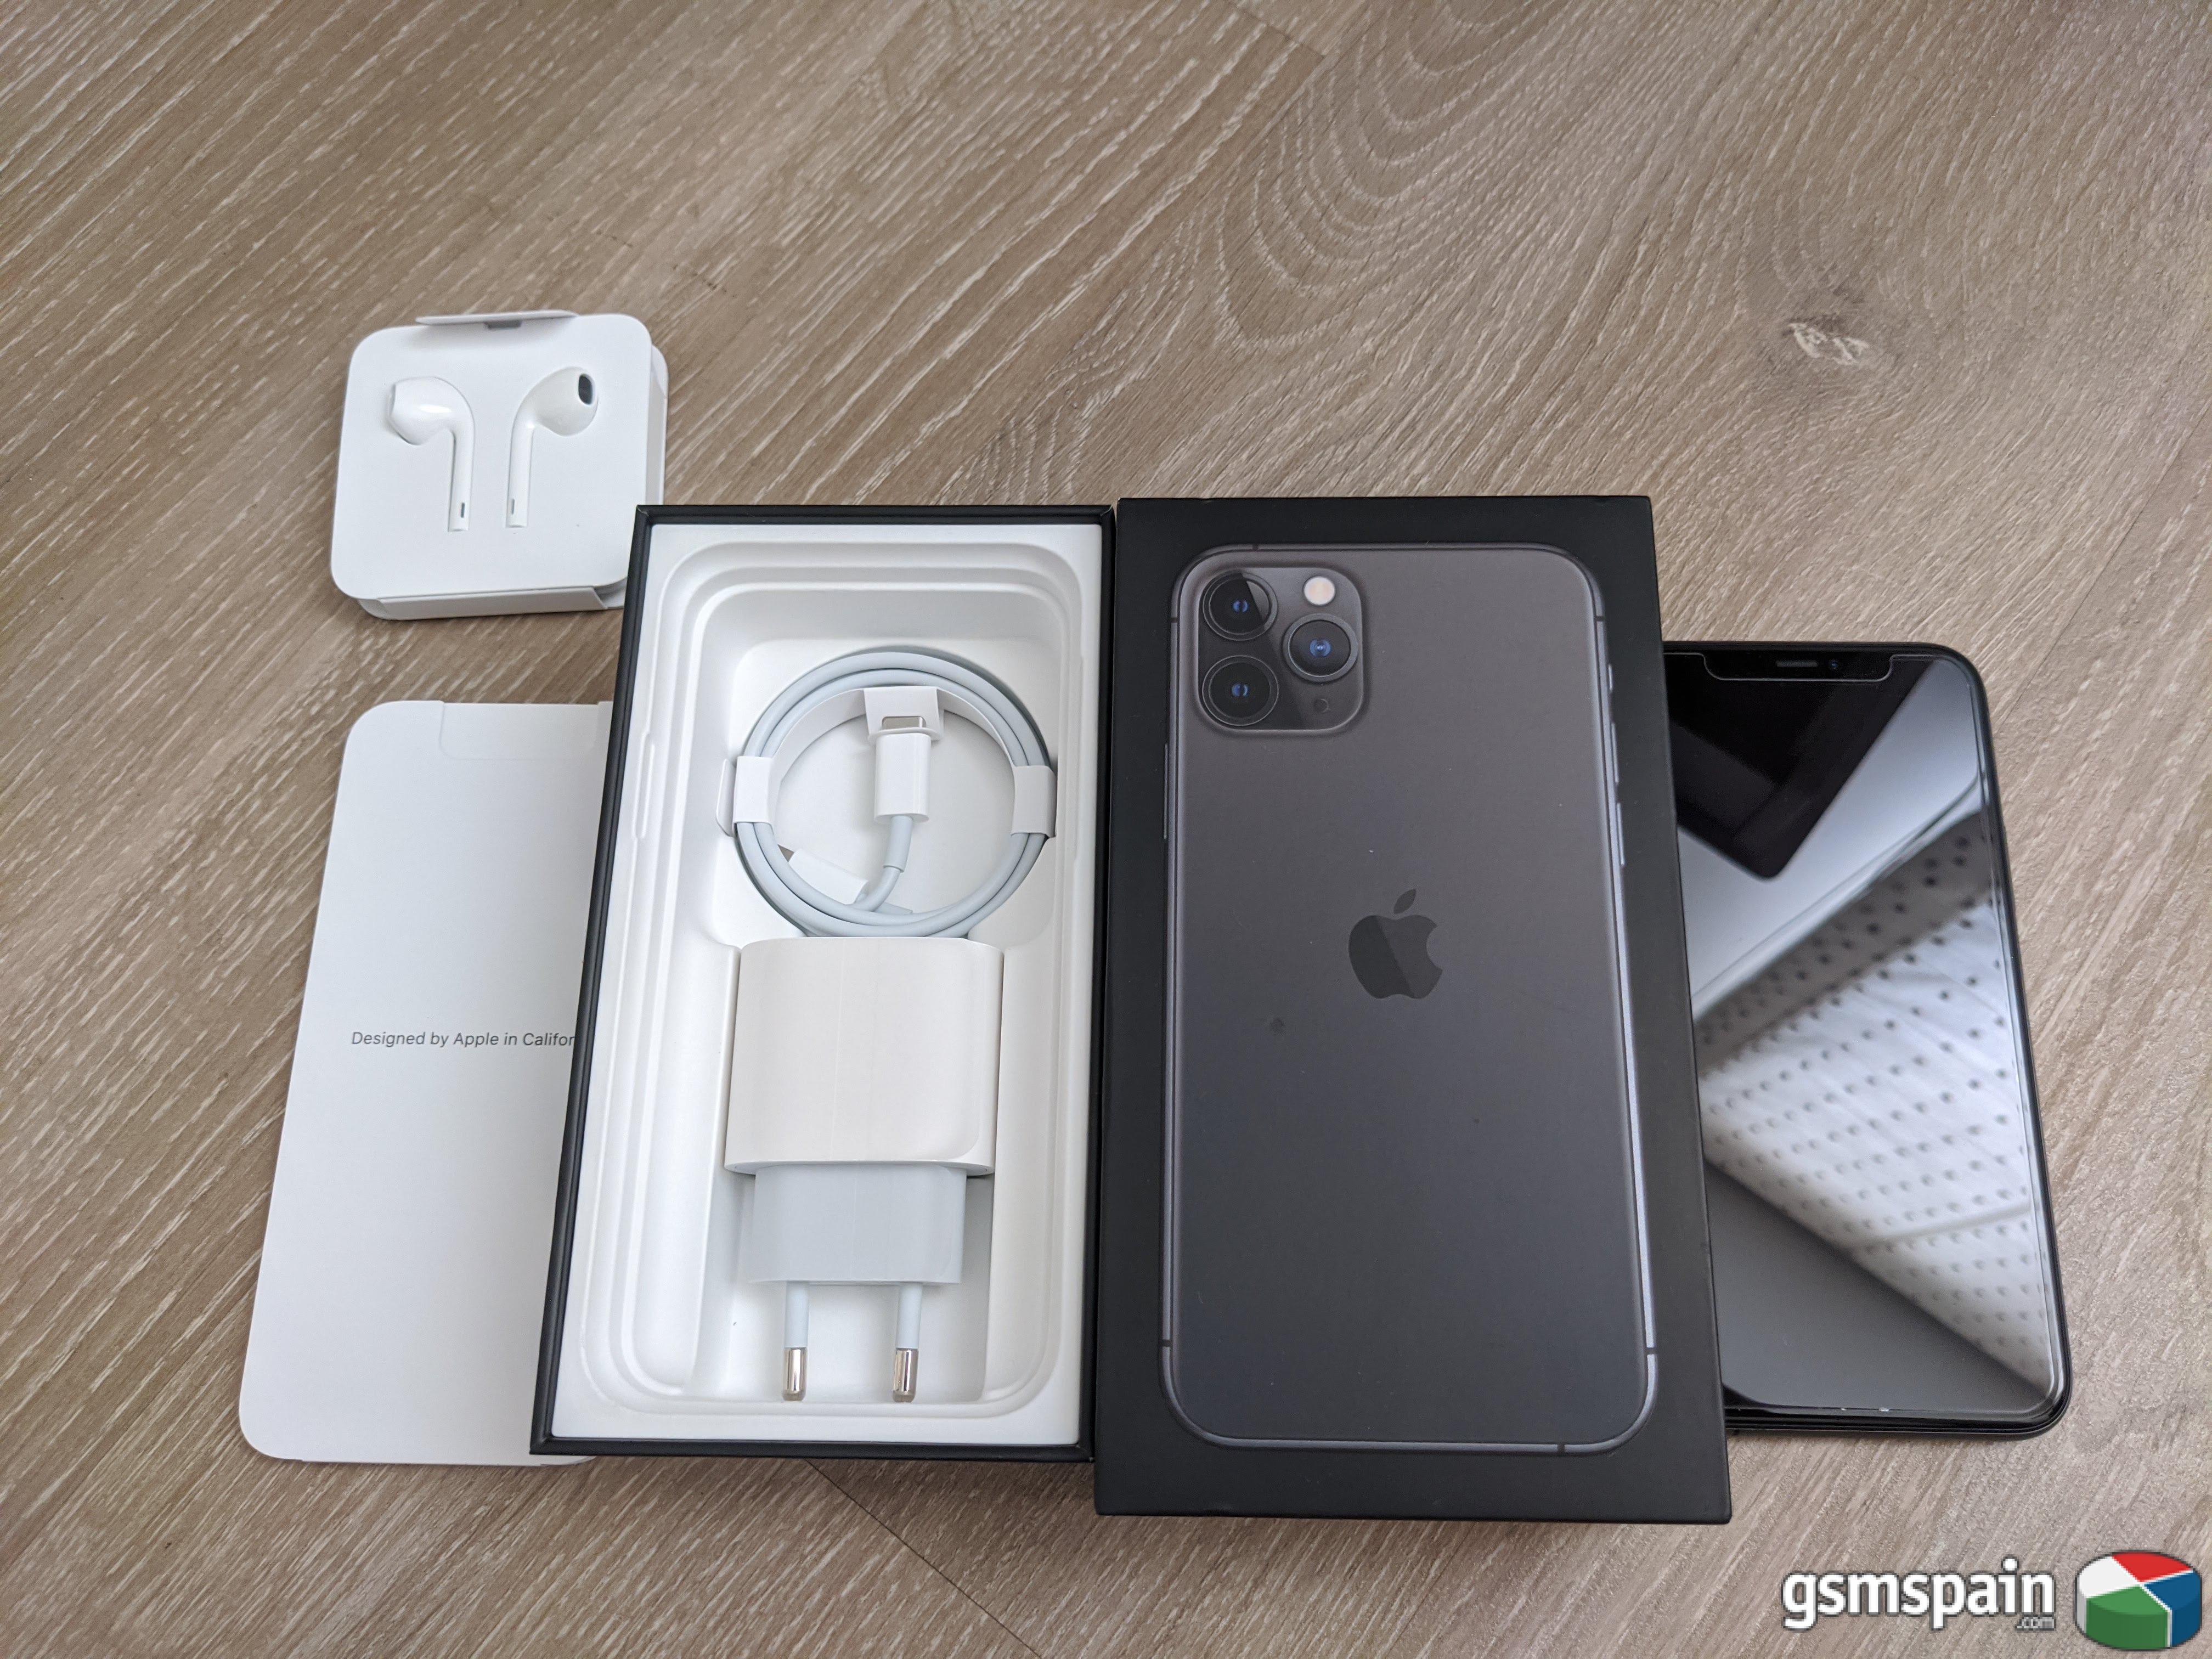 [VENDO] iPhone 11 Pro 64GB SPACE GREY IMPECABLE